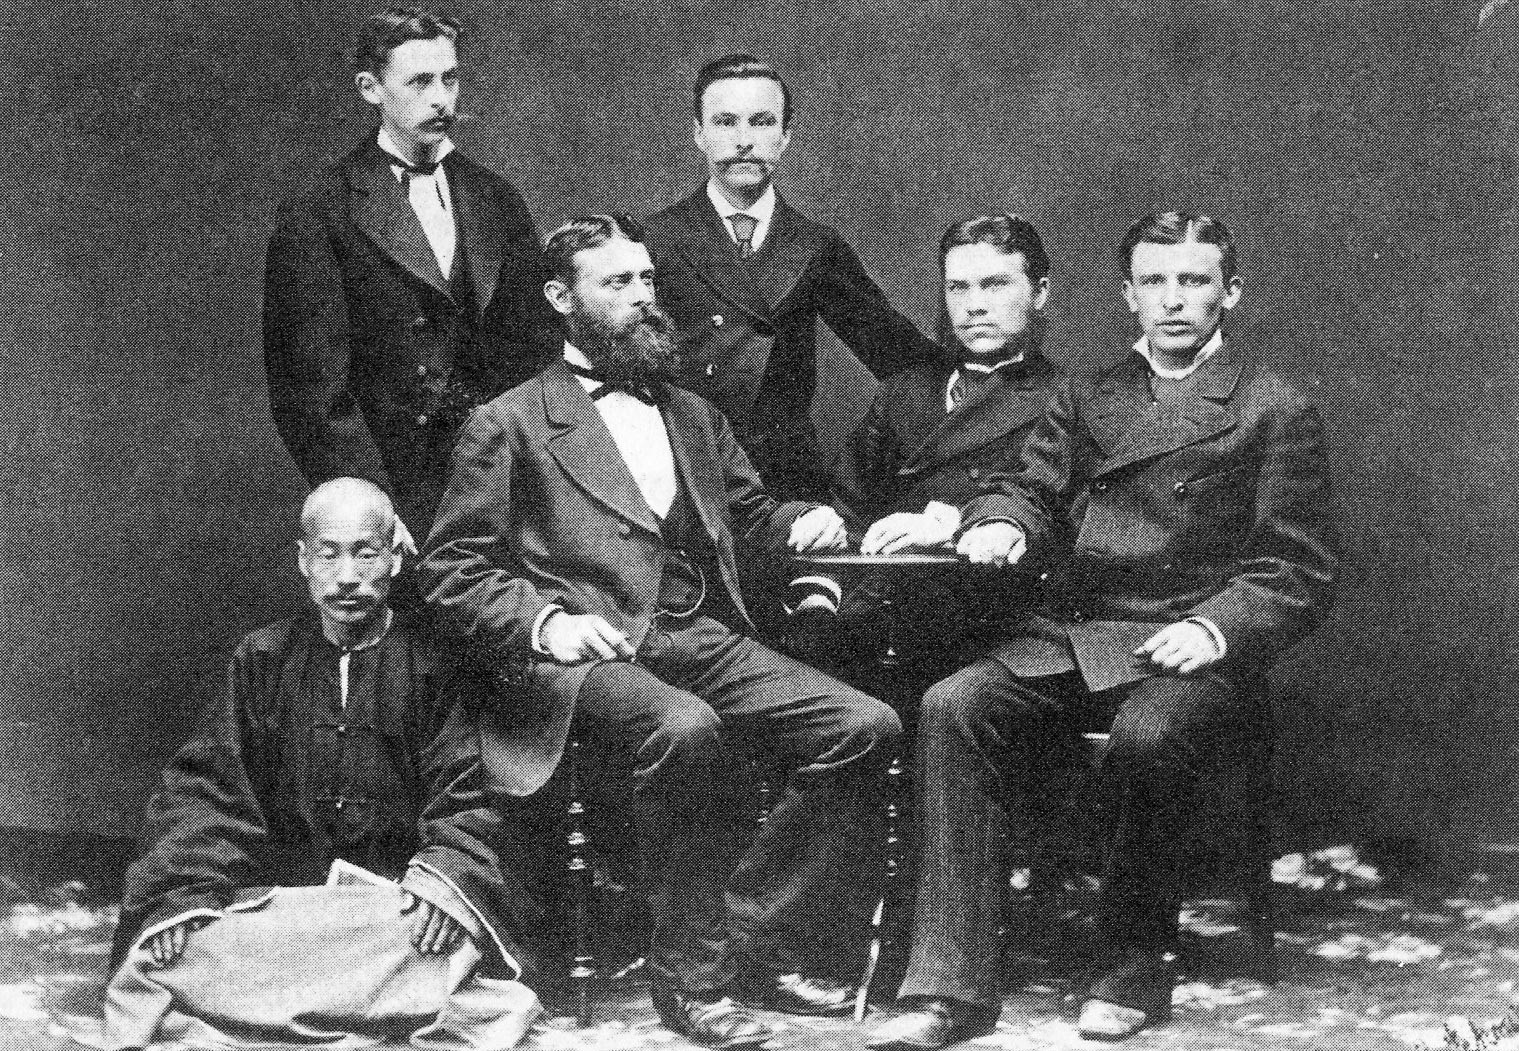 The two Gustavs, together with Adolf Dattan and partners